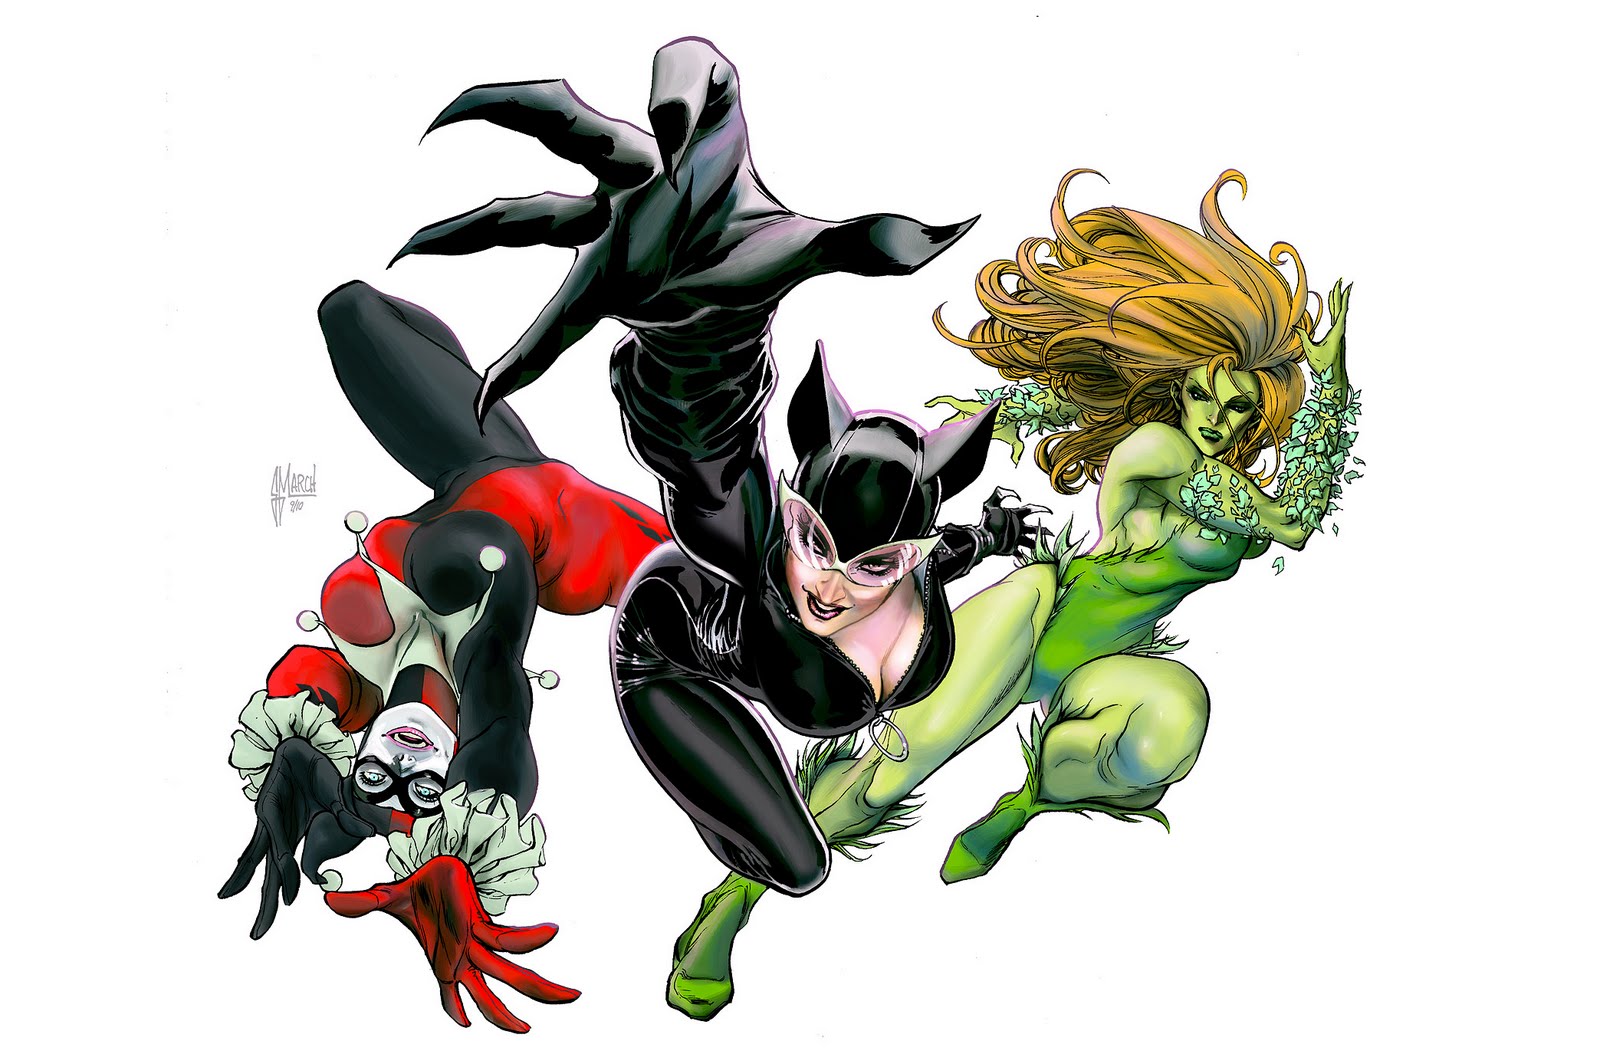 Gotham Sirens 19 cover Characters We Want to See in ‘Gotham City Sirens’